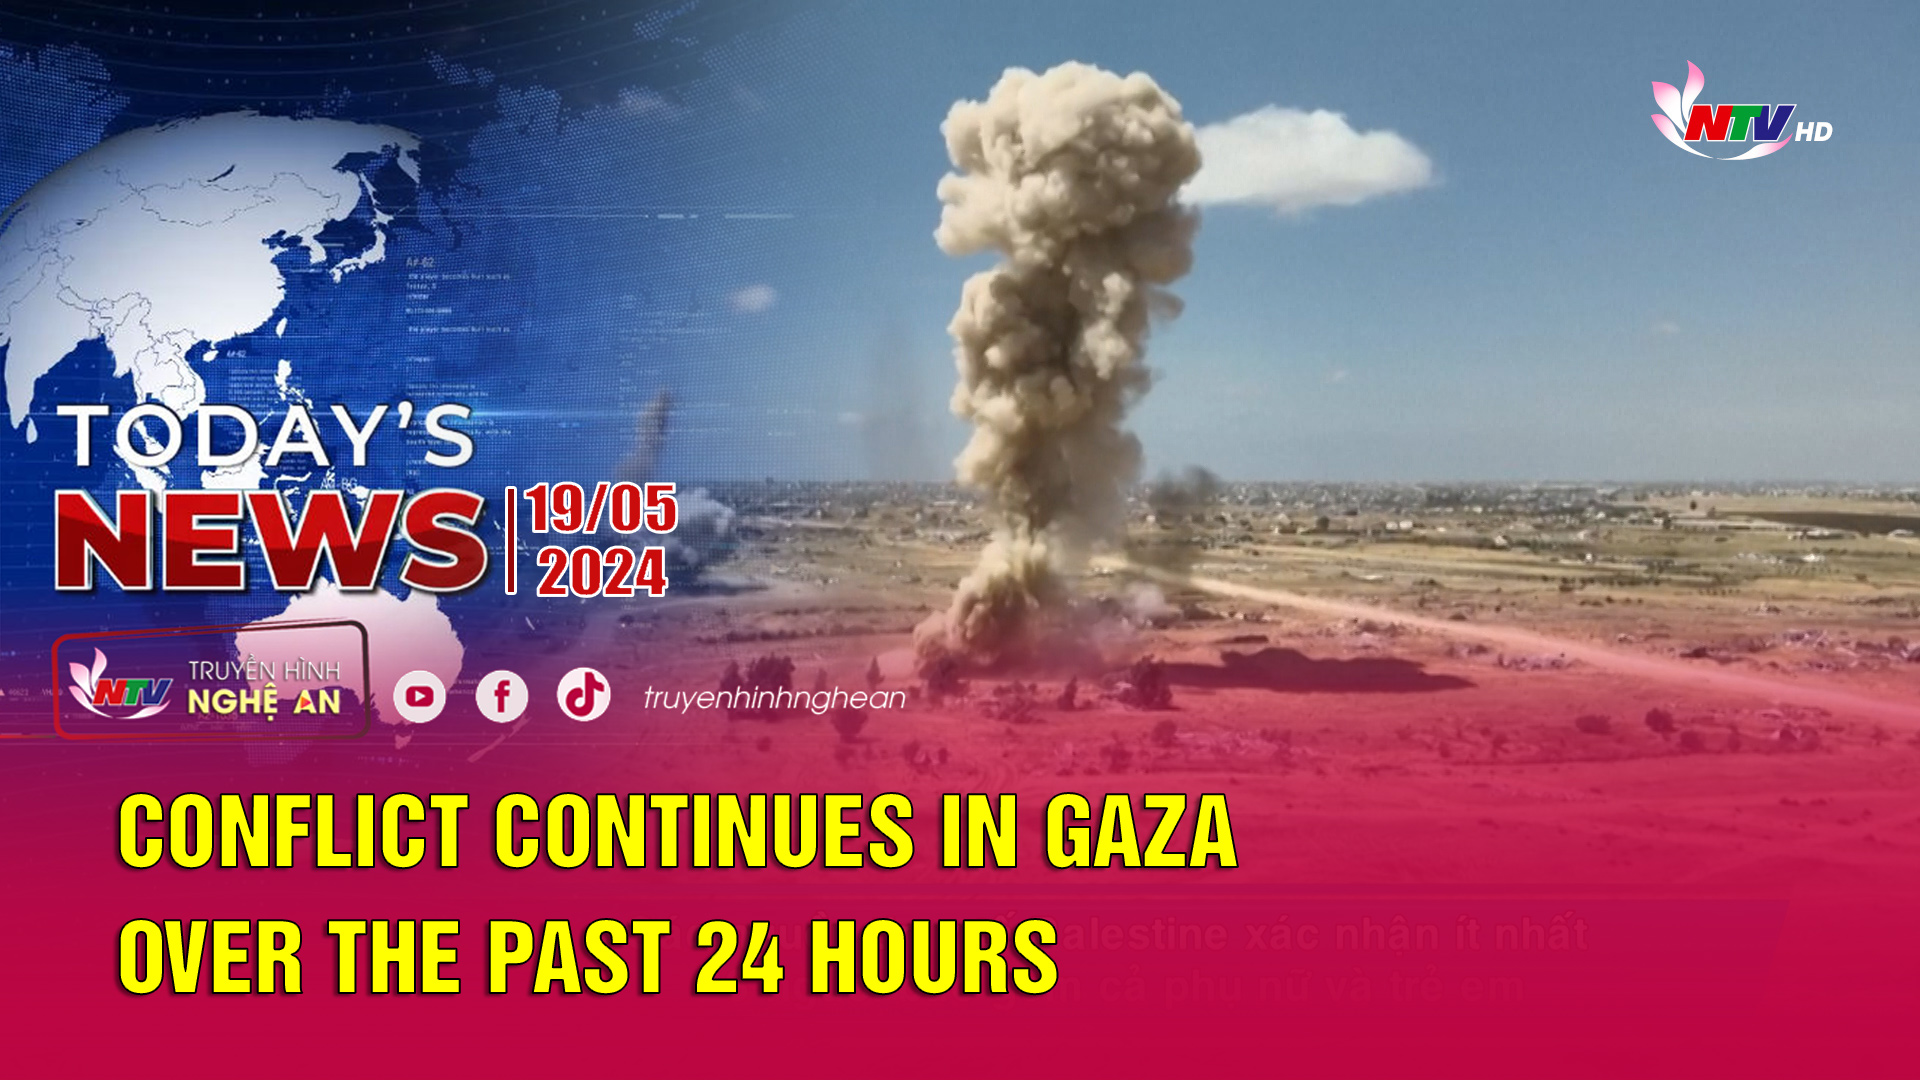 Today's News 19/05/2024: Conflict continues in Gaza over the past 24 hours